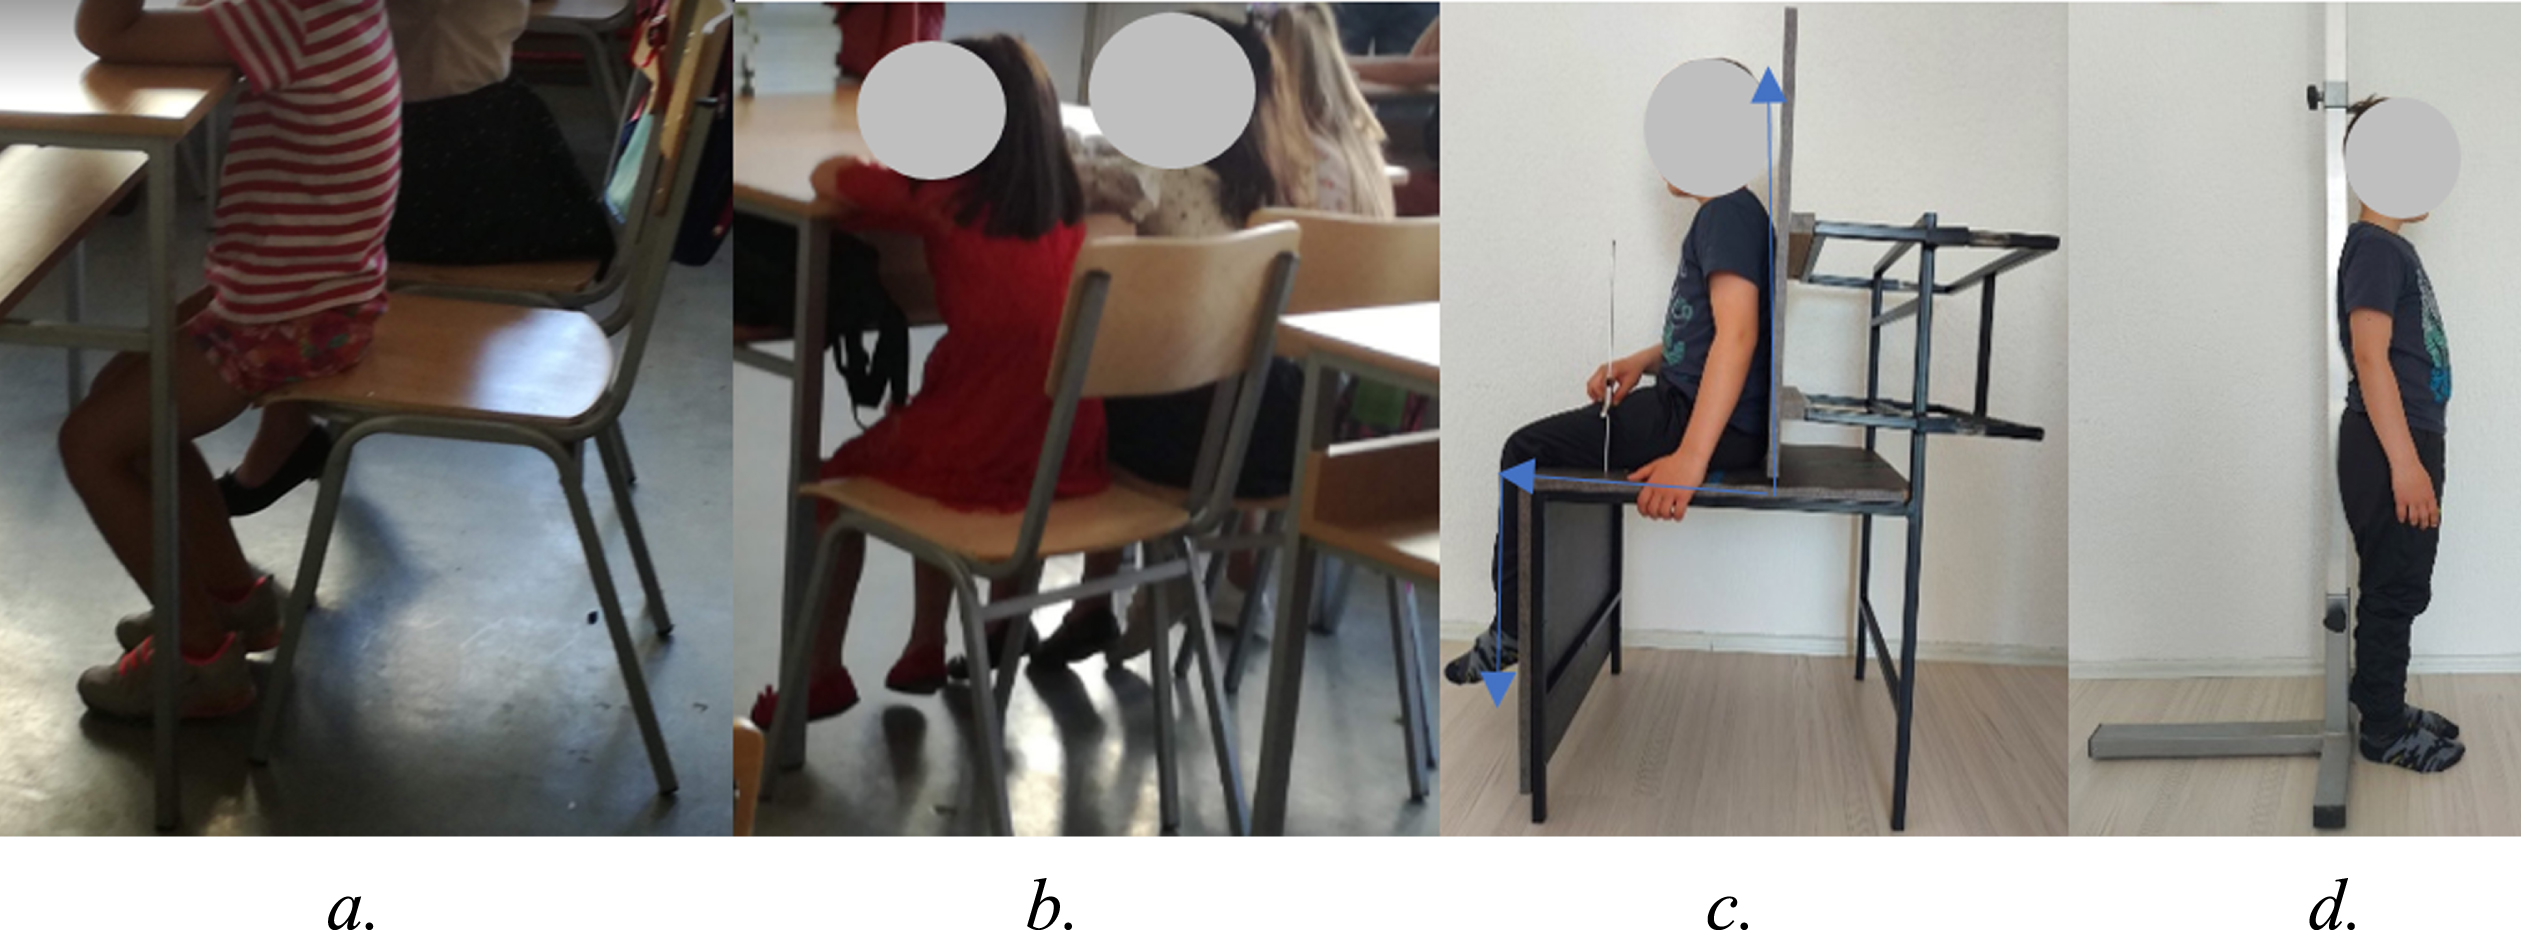 a. and b. Classroom’s furniture, c. and d. Process of measurements.